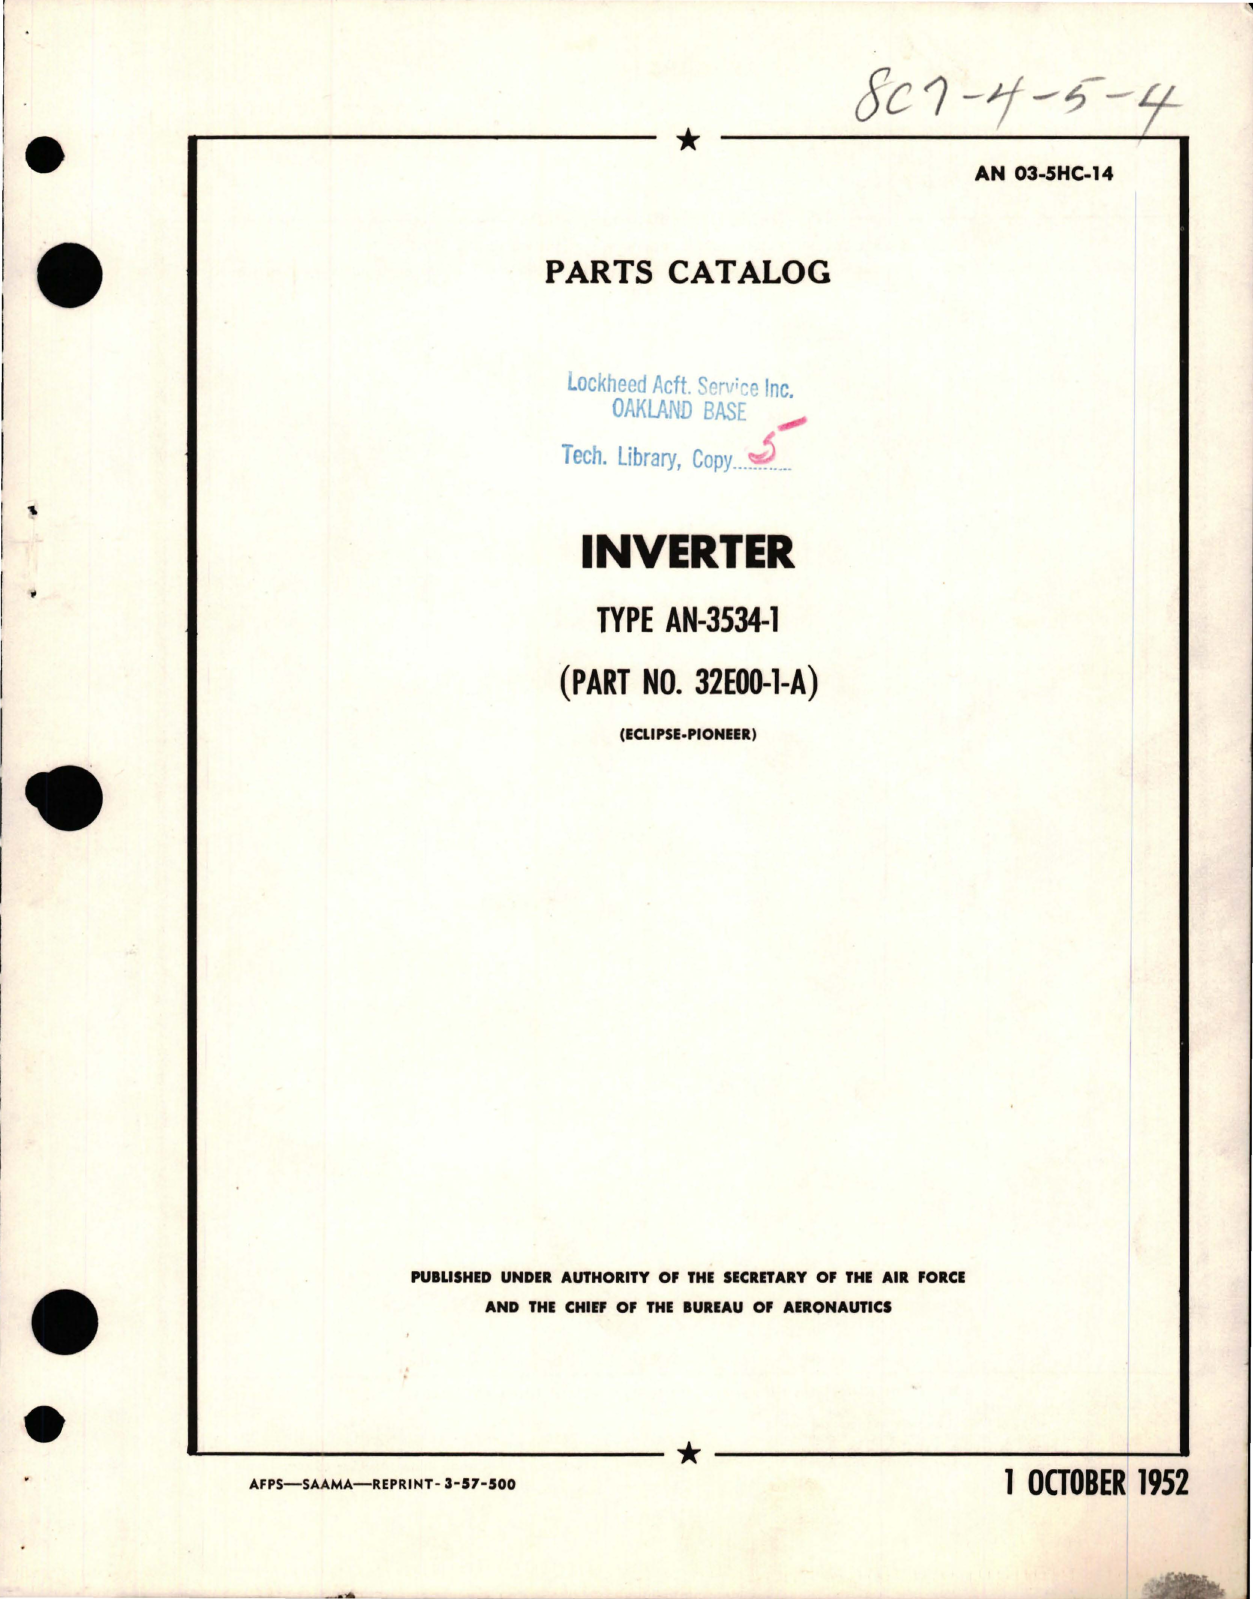 Sample page 1 from AirCorps Library document: Parts Catalog for Inverter - Type AN-3534-1 - Part 32E00-1-A 